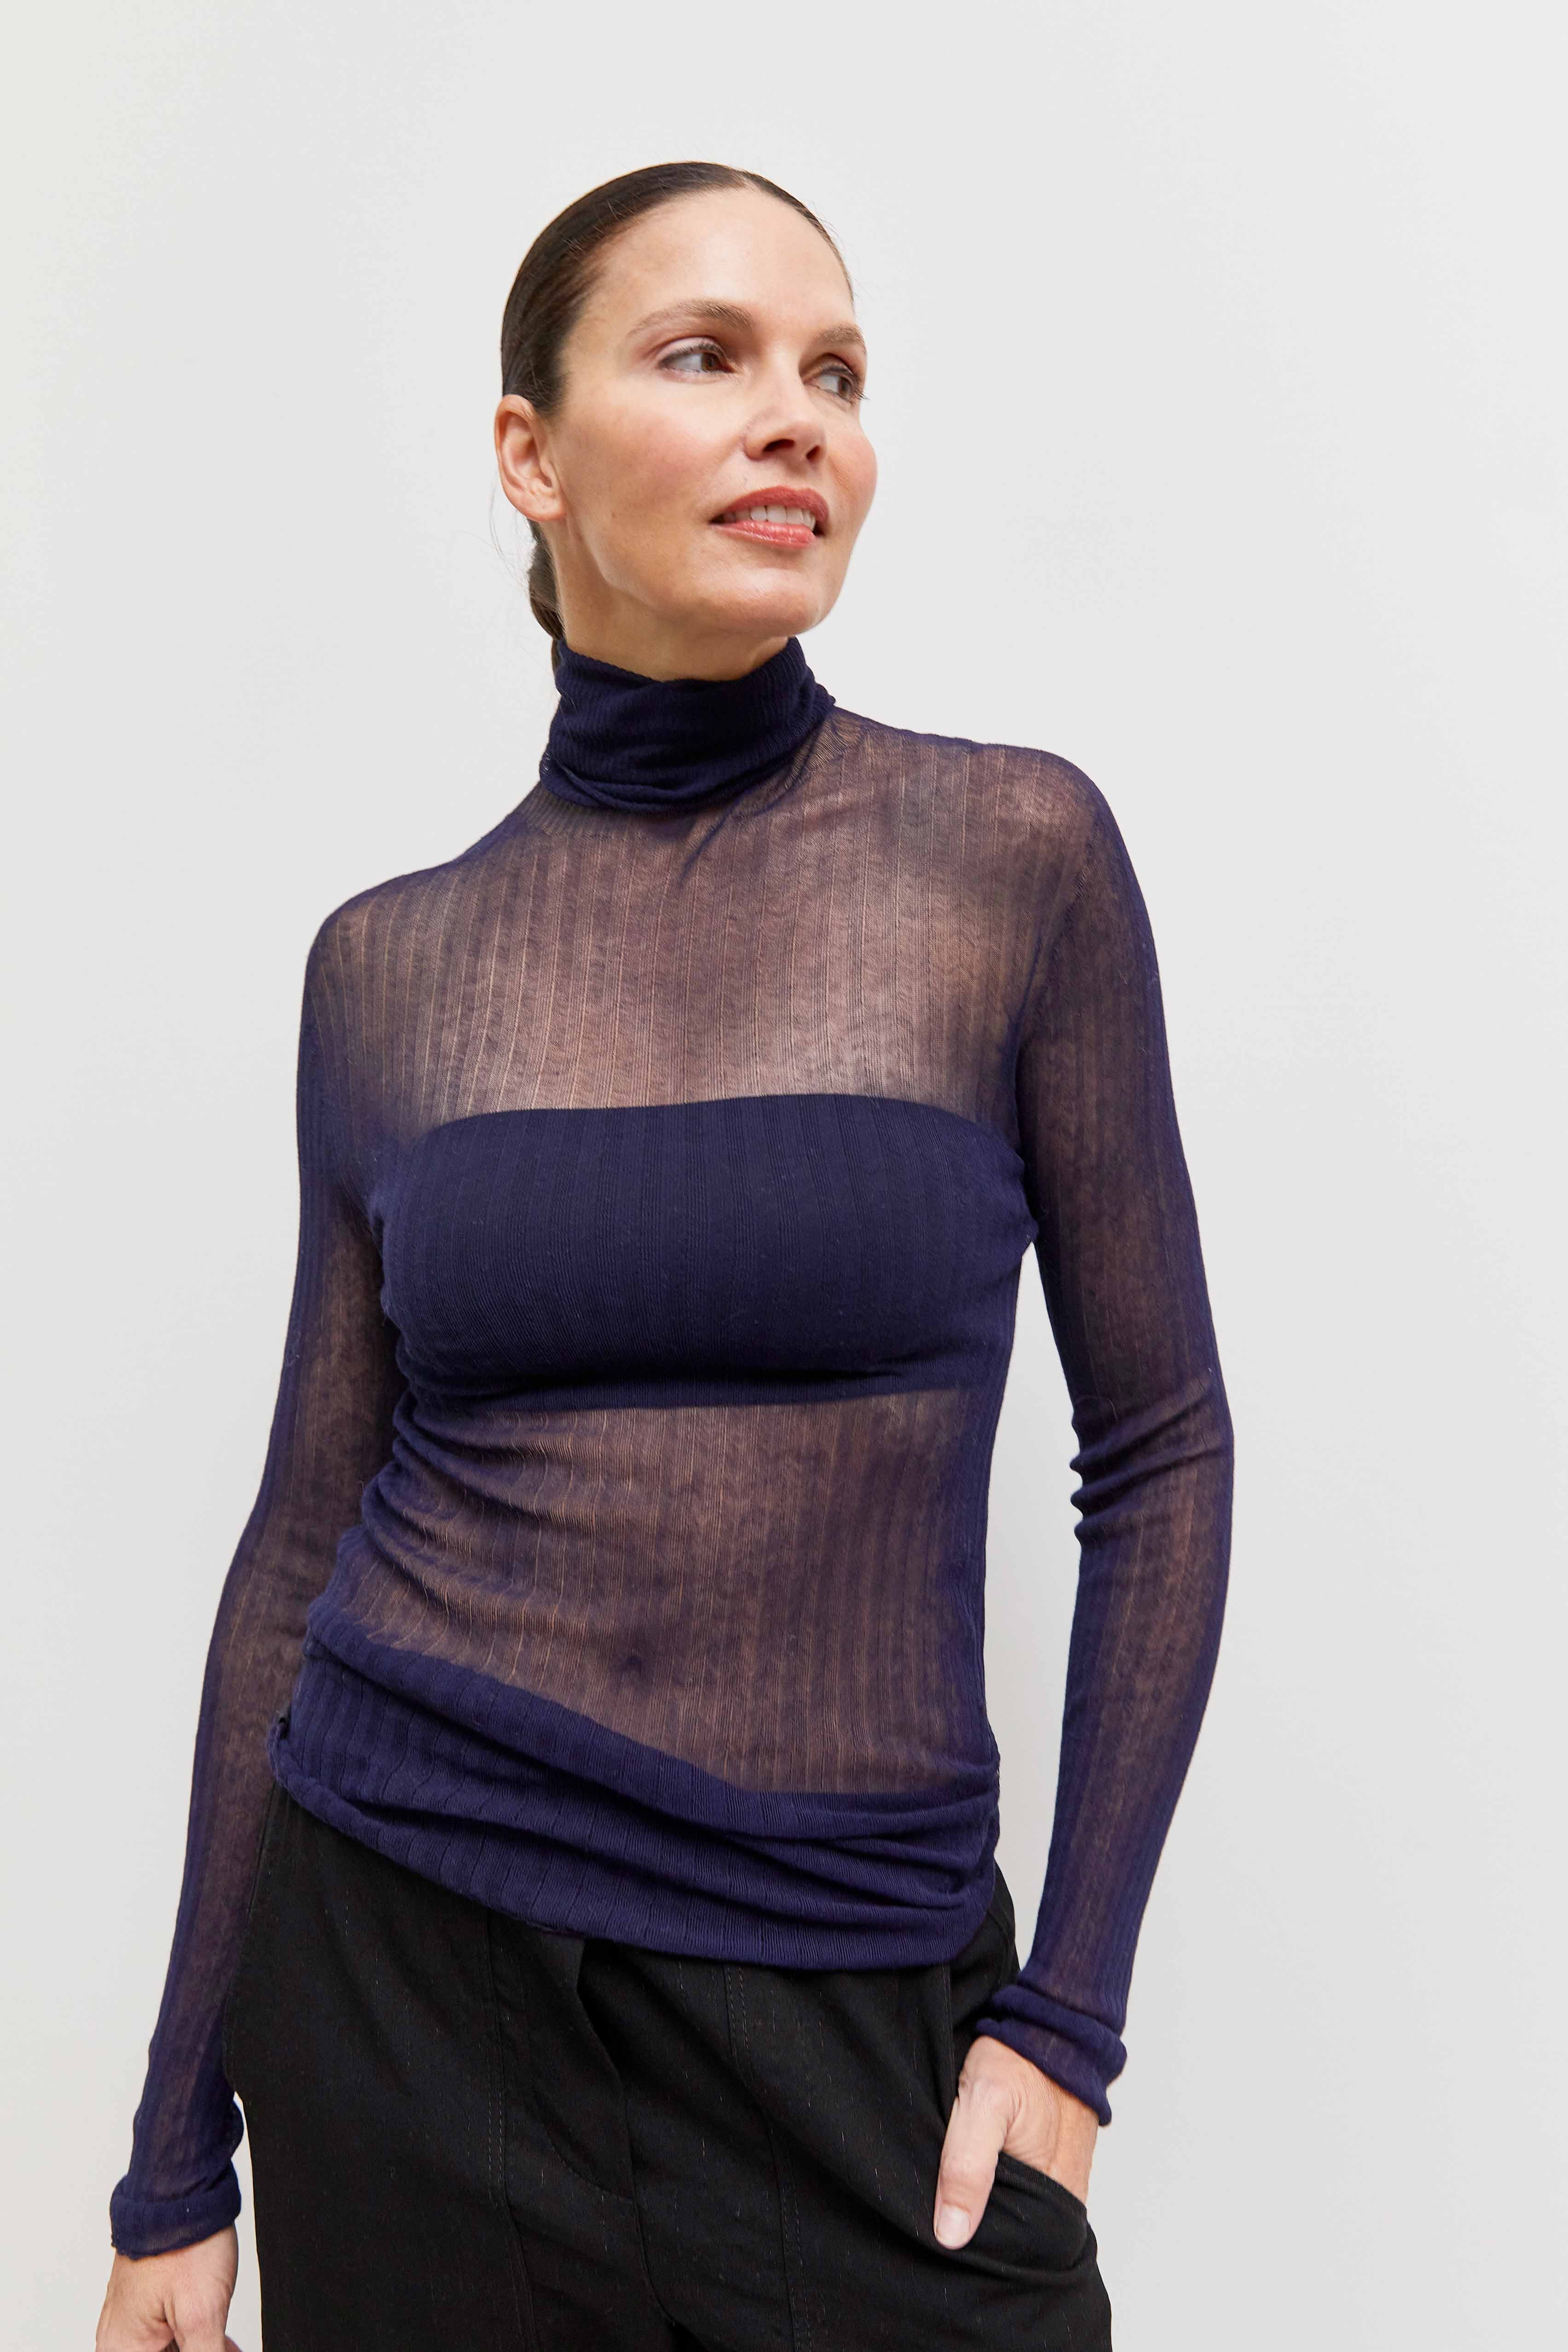 standard issue navy tulle skivvy.